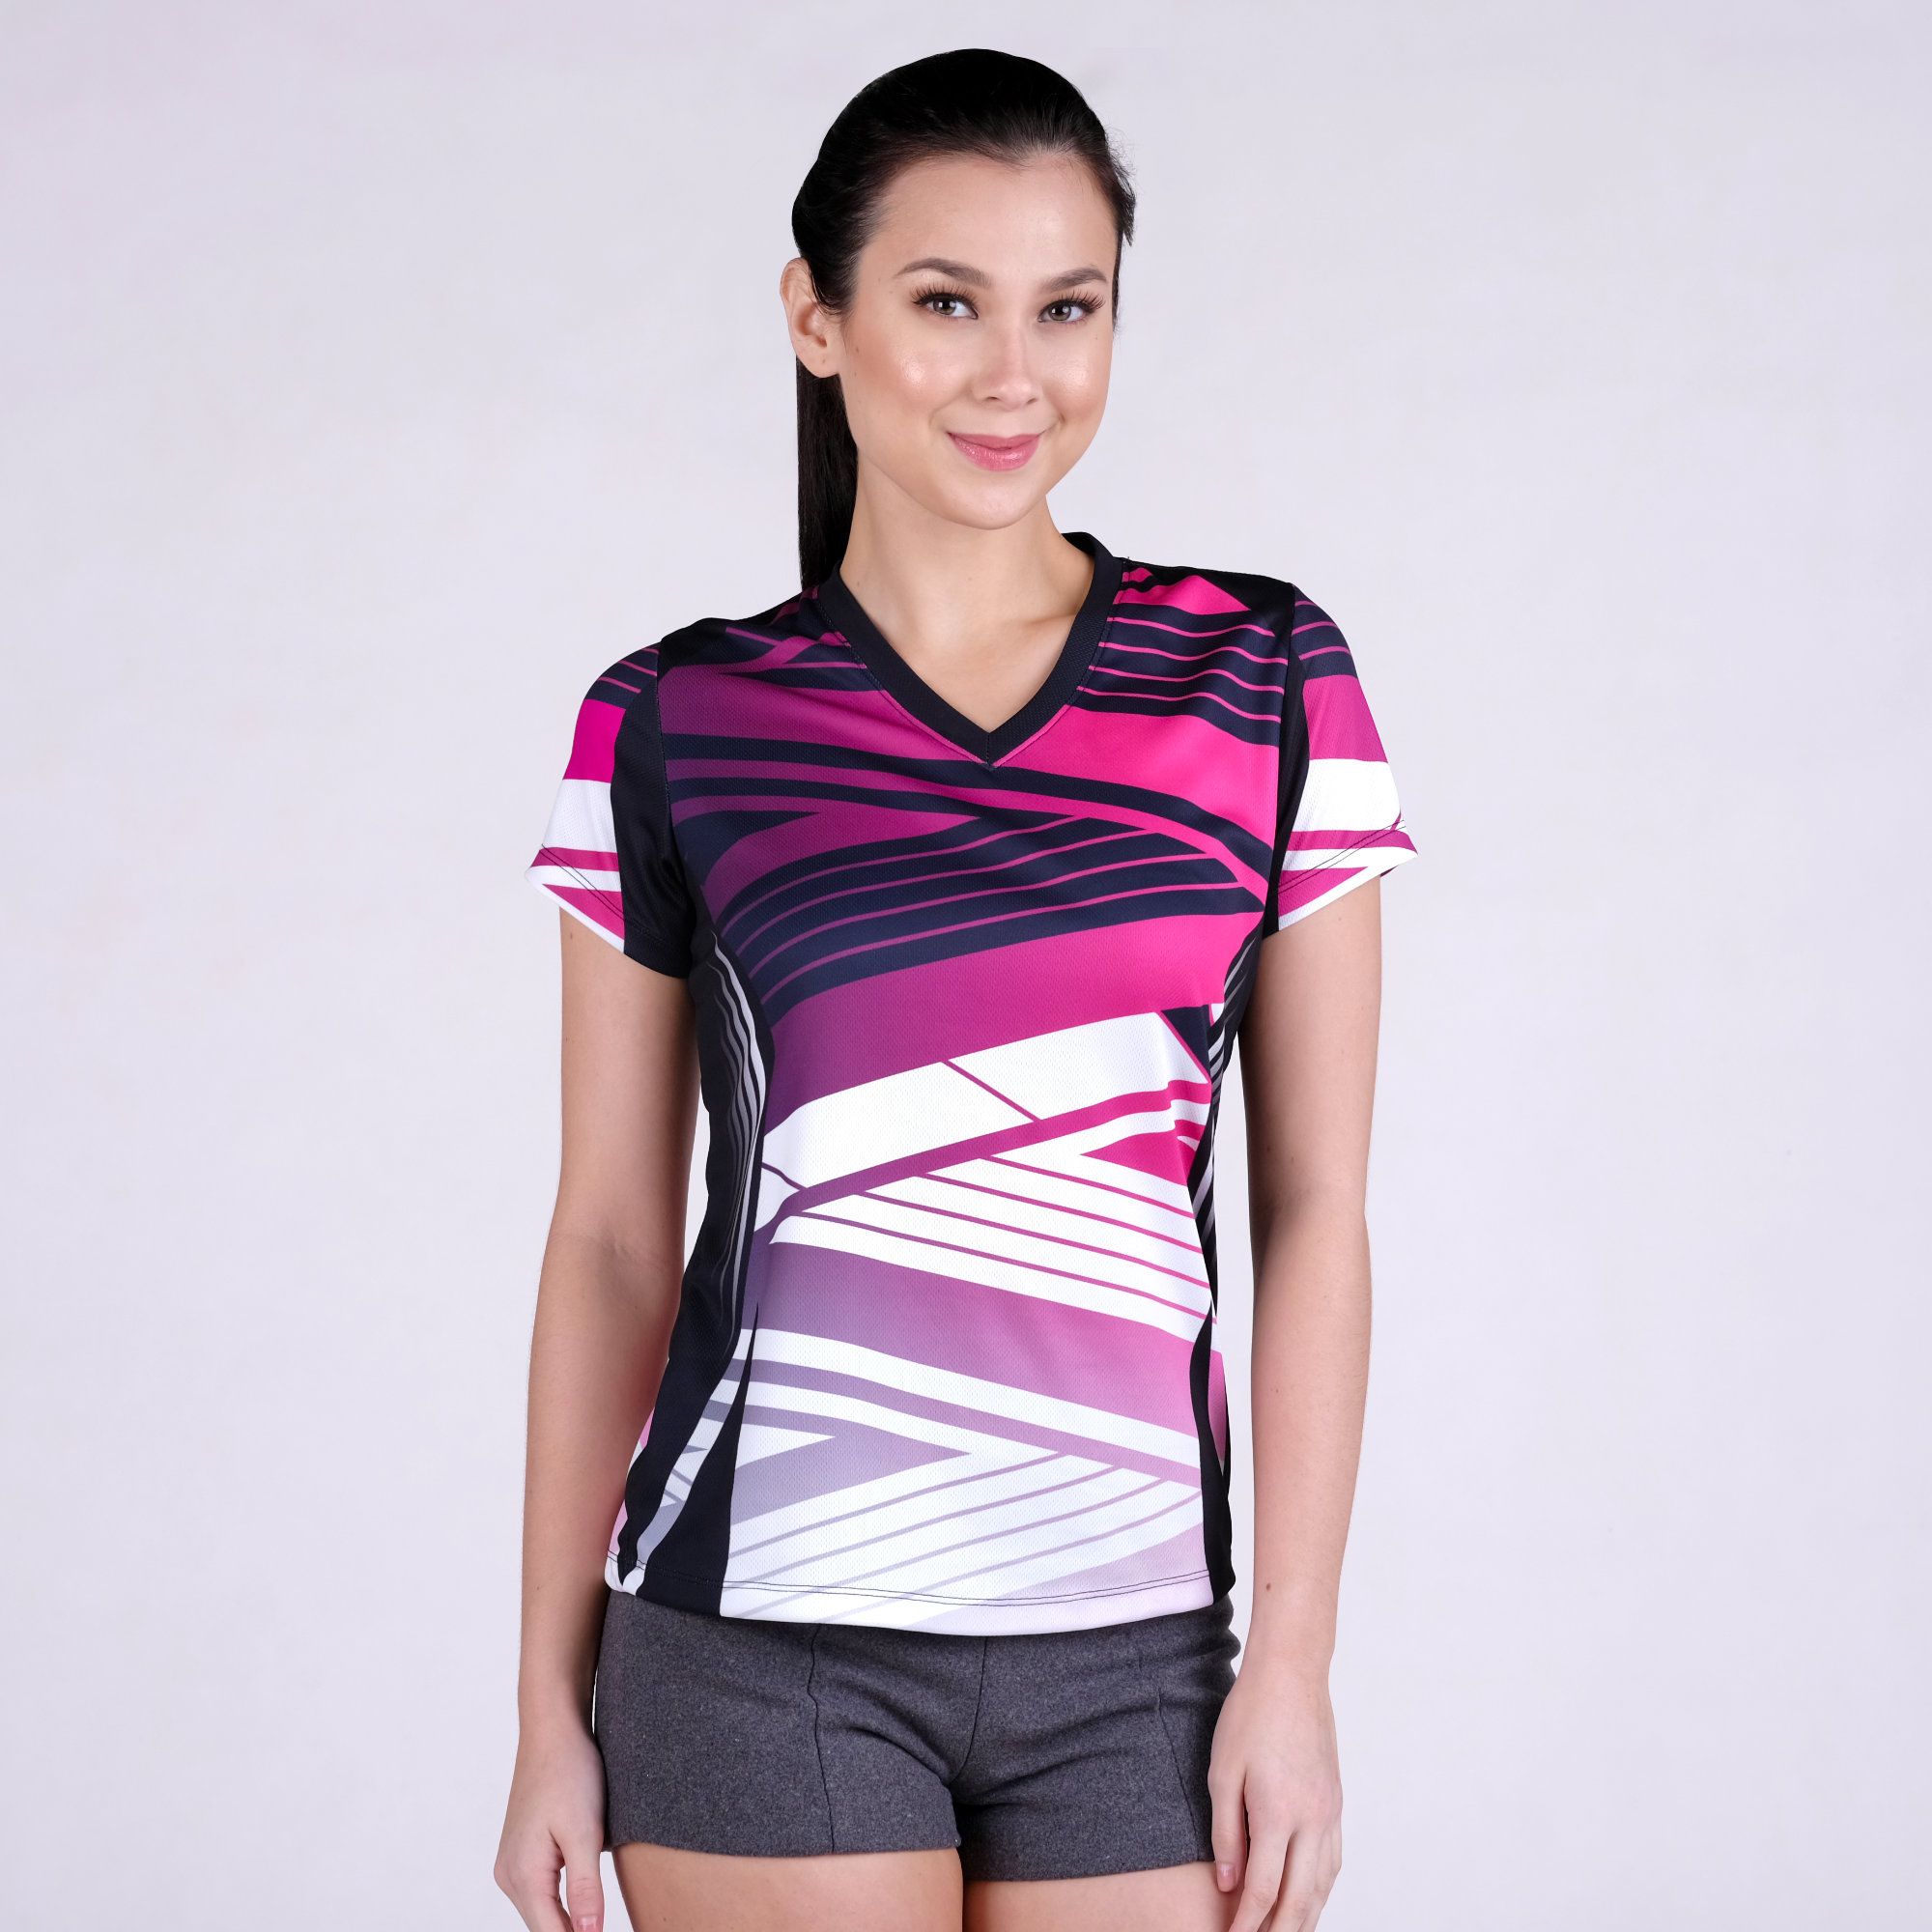 Sublimated Women's Sportswear Philippines Customized Designs